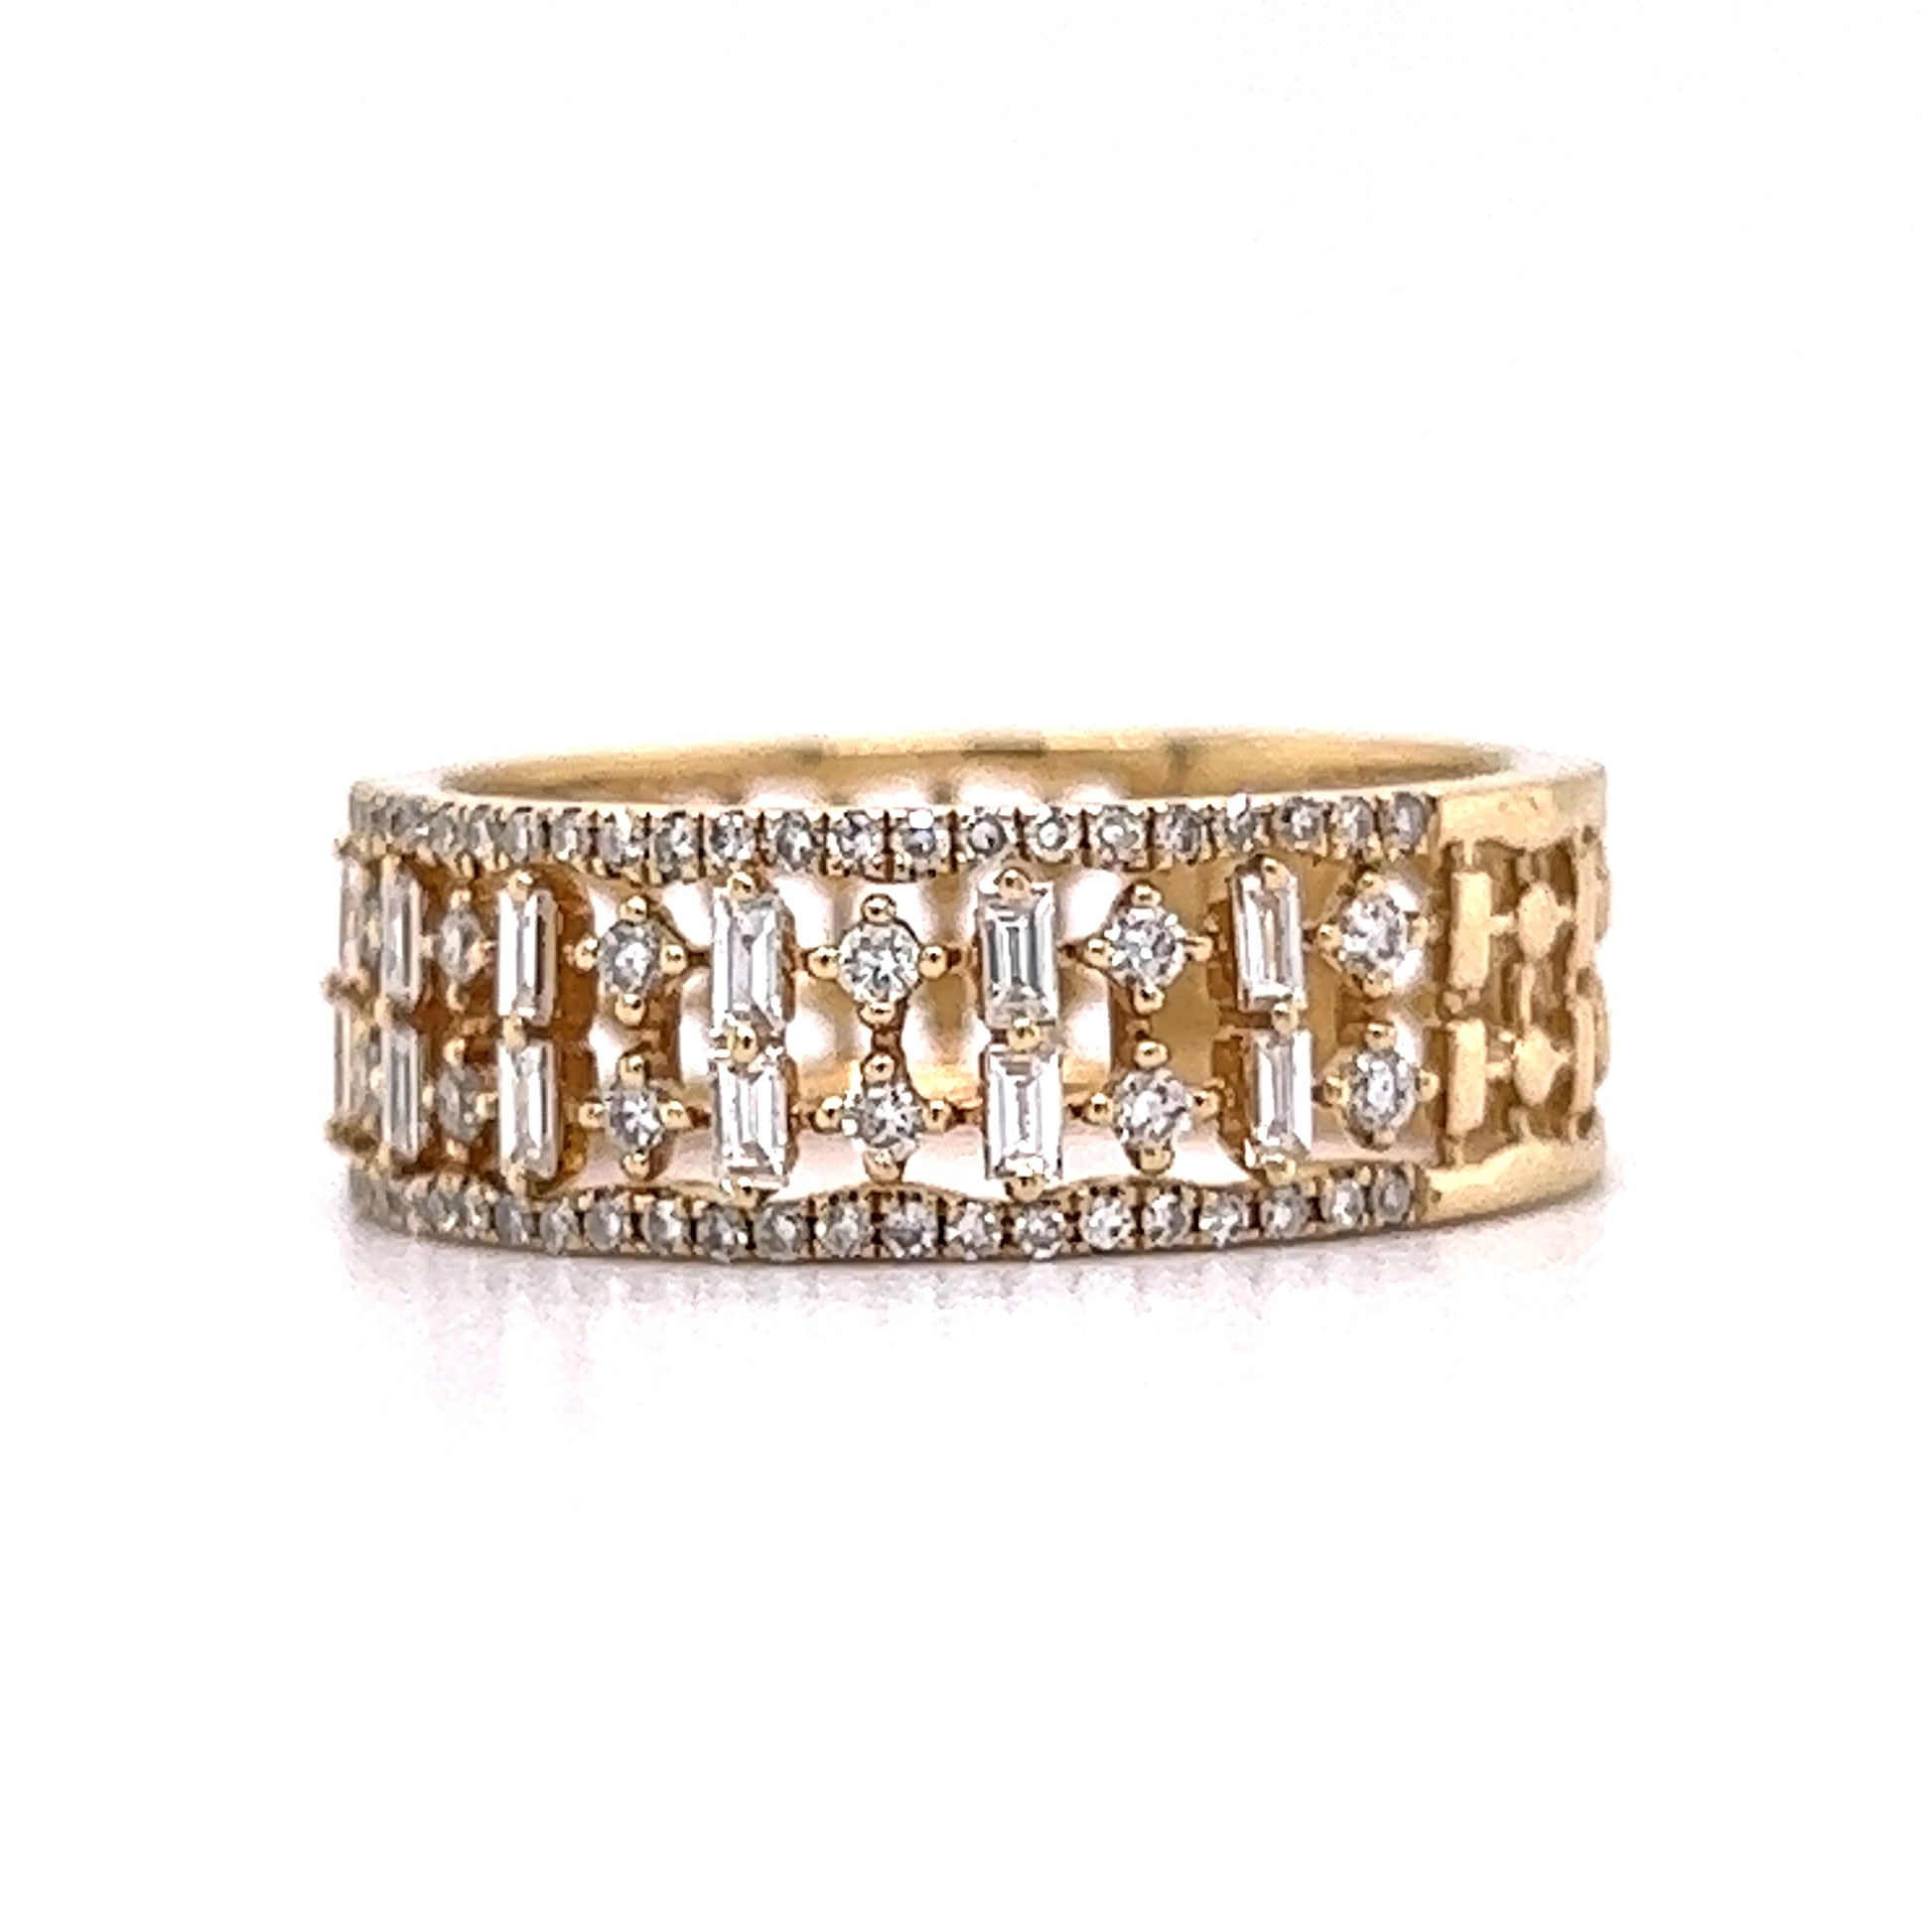 Thick Pave Diamond Cocktail Ring 14k Yellow GoldComposition: 14 Karat Yellow Gold Ring Size: 7.25 Total Diamond Weight: .70ct Total Gram Weight: 3.5 g Inscription: 14k 585
      